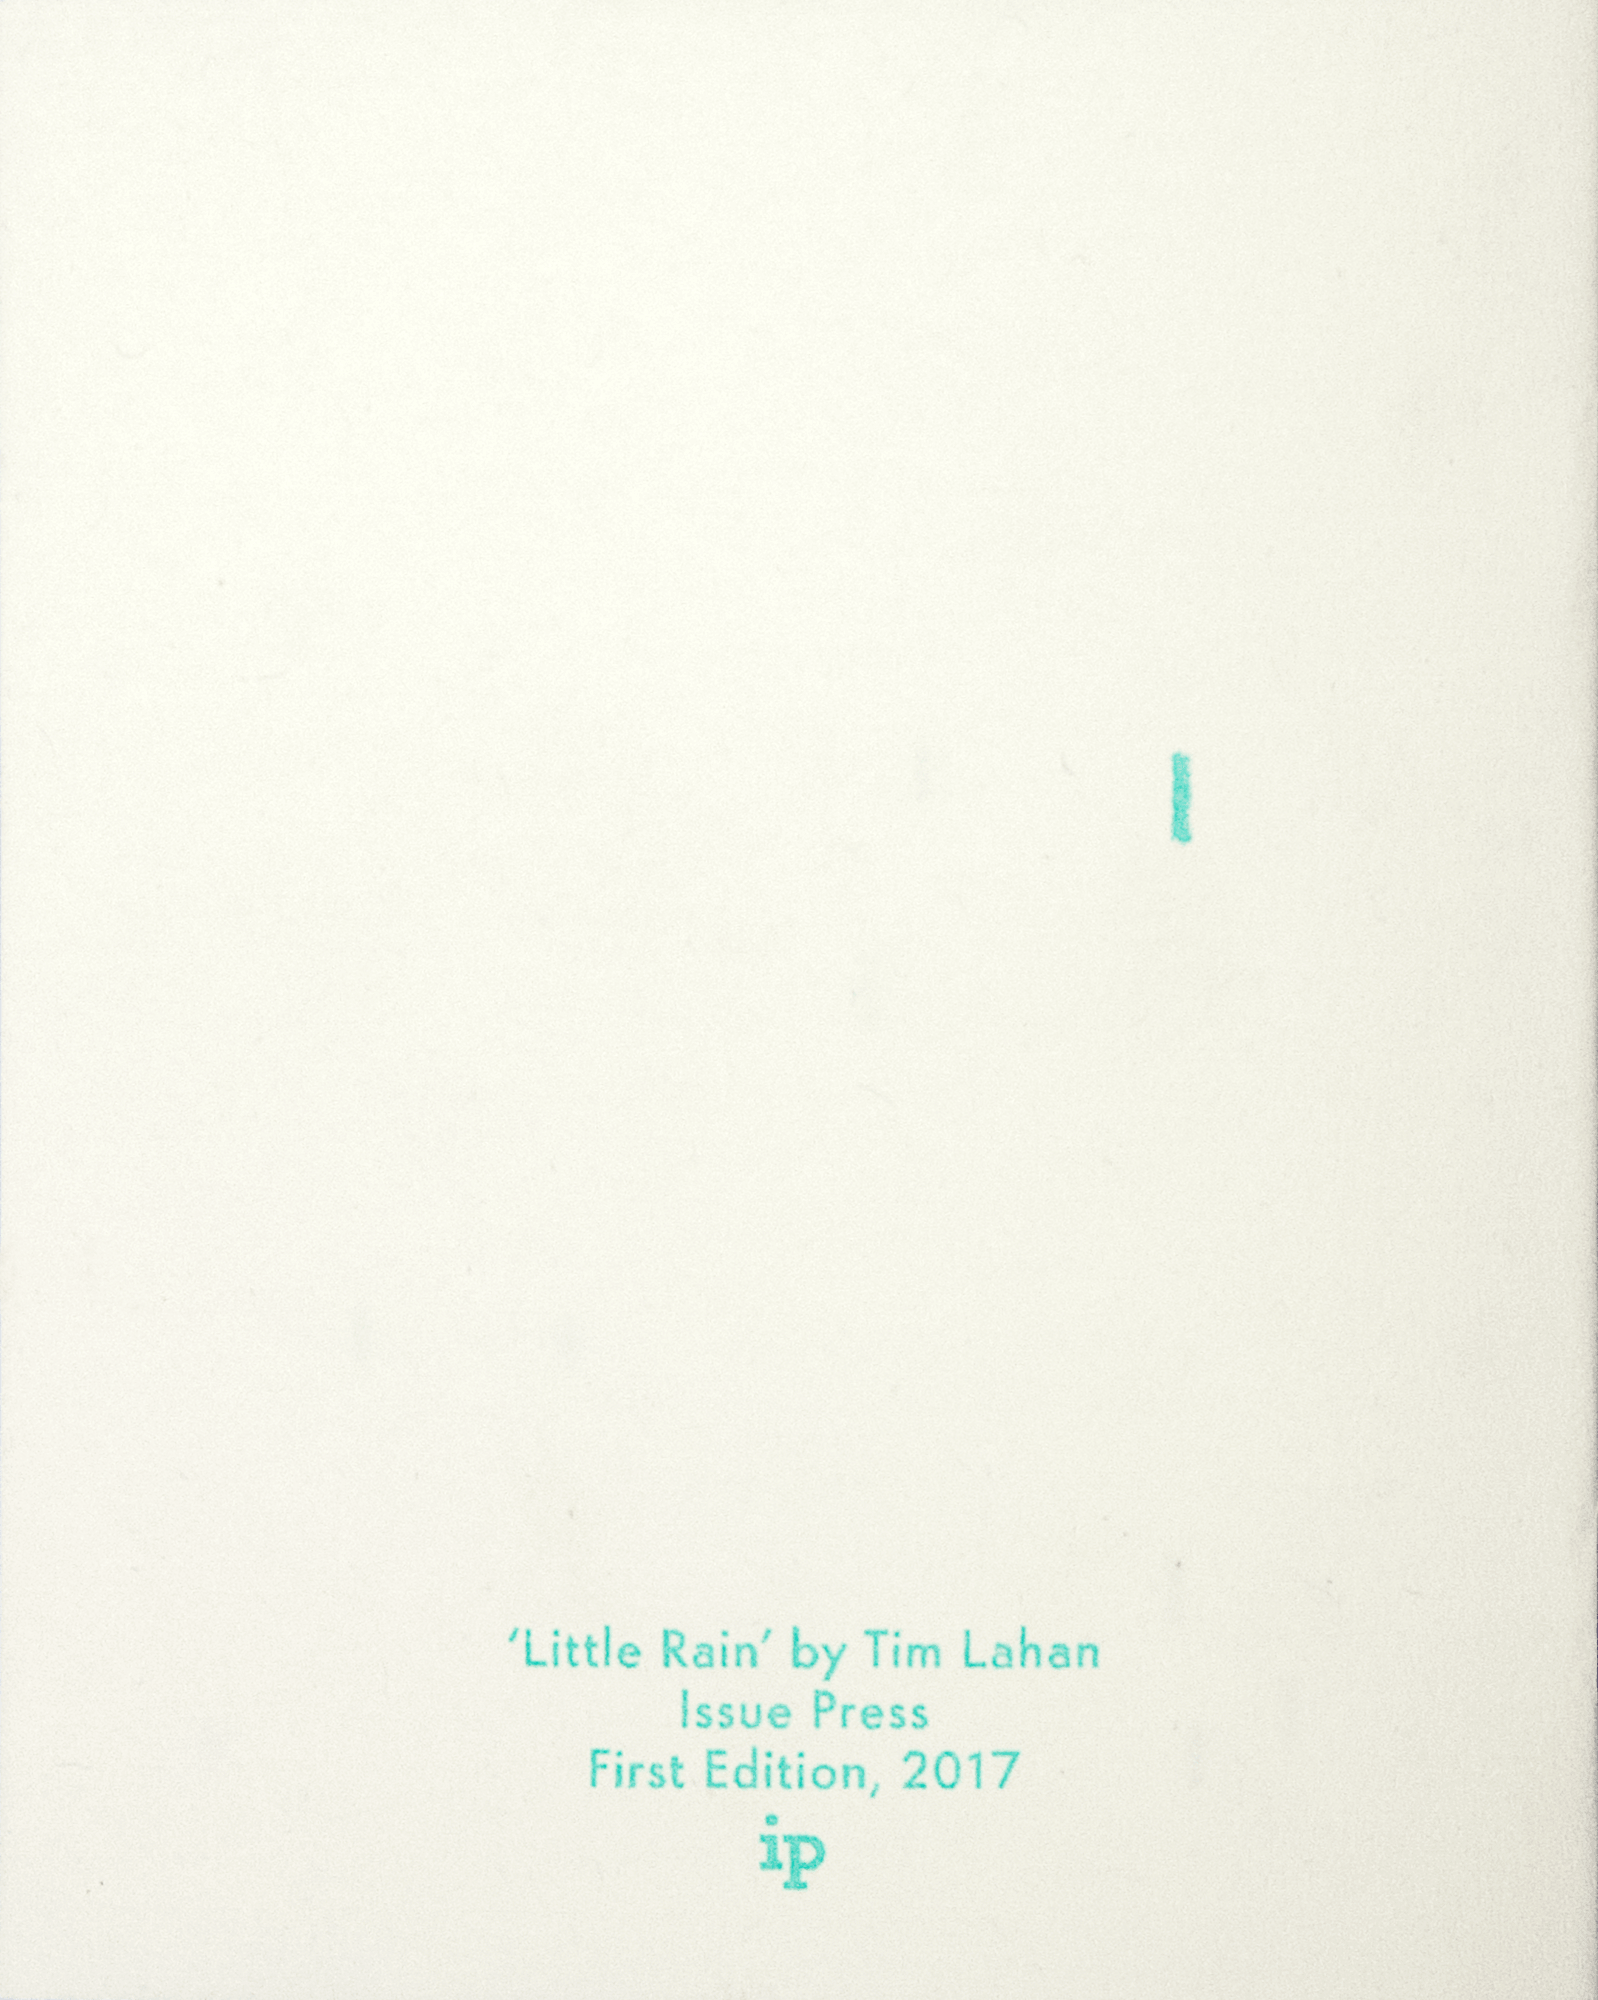 Excerpt of Little Rain (Day) by Tim Lahan